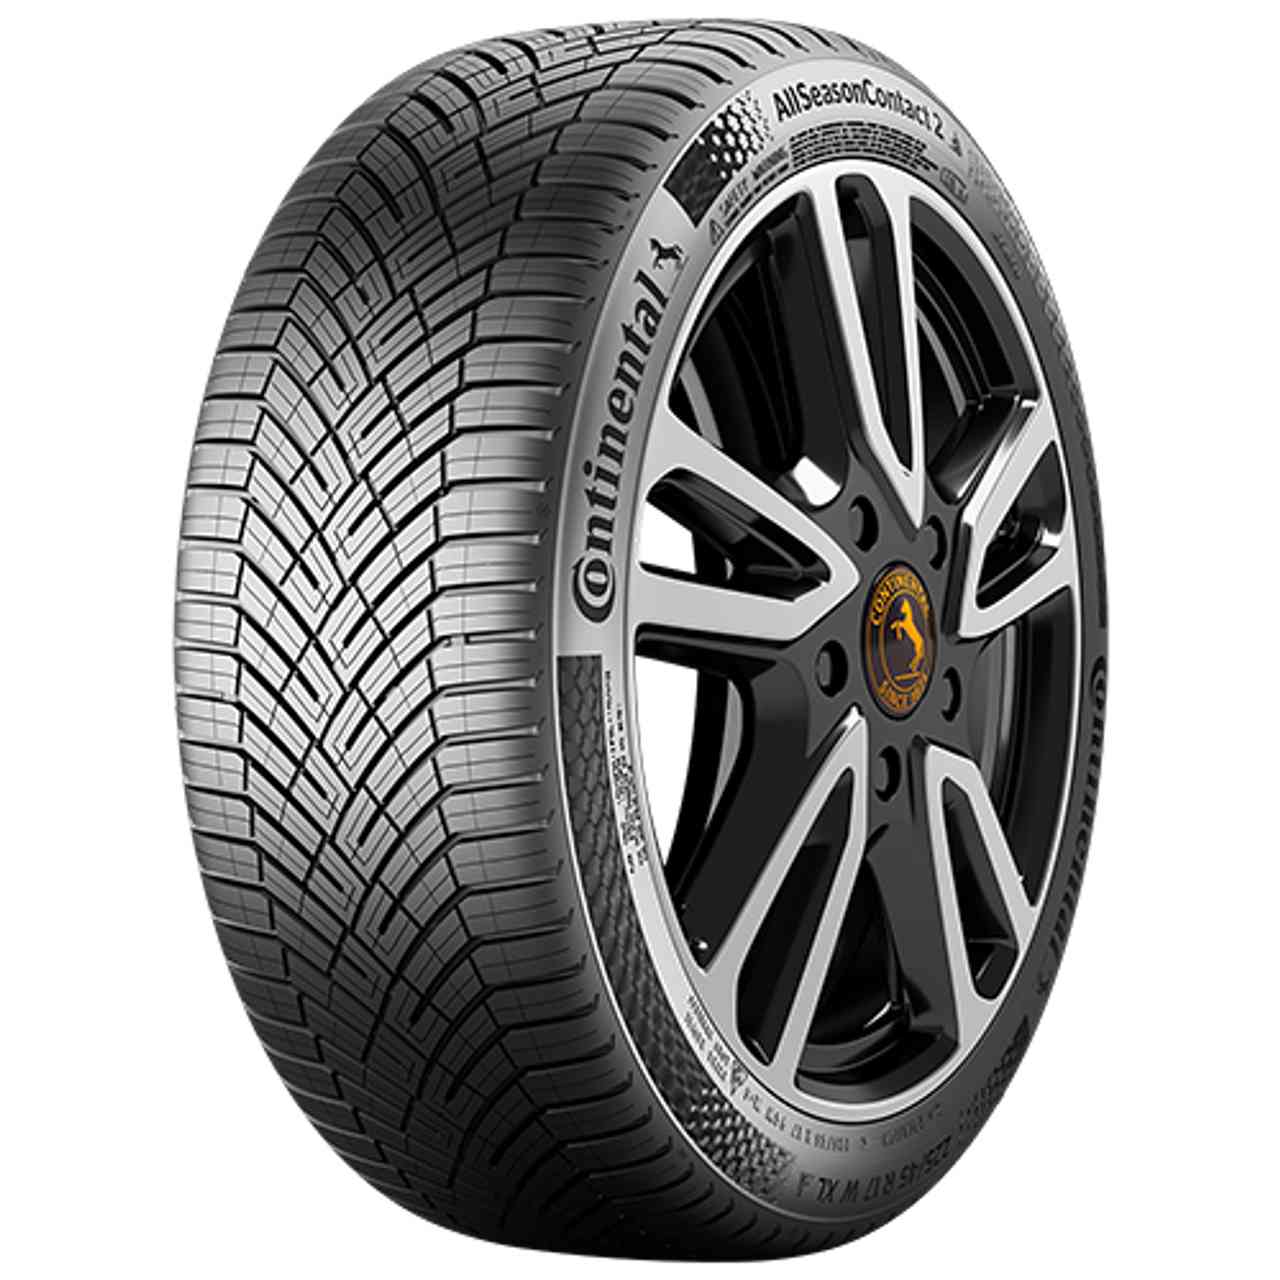 CONTINENTAL ALLSEASONCONTACT 2 (EVc) 195/65R15 95V BSW